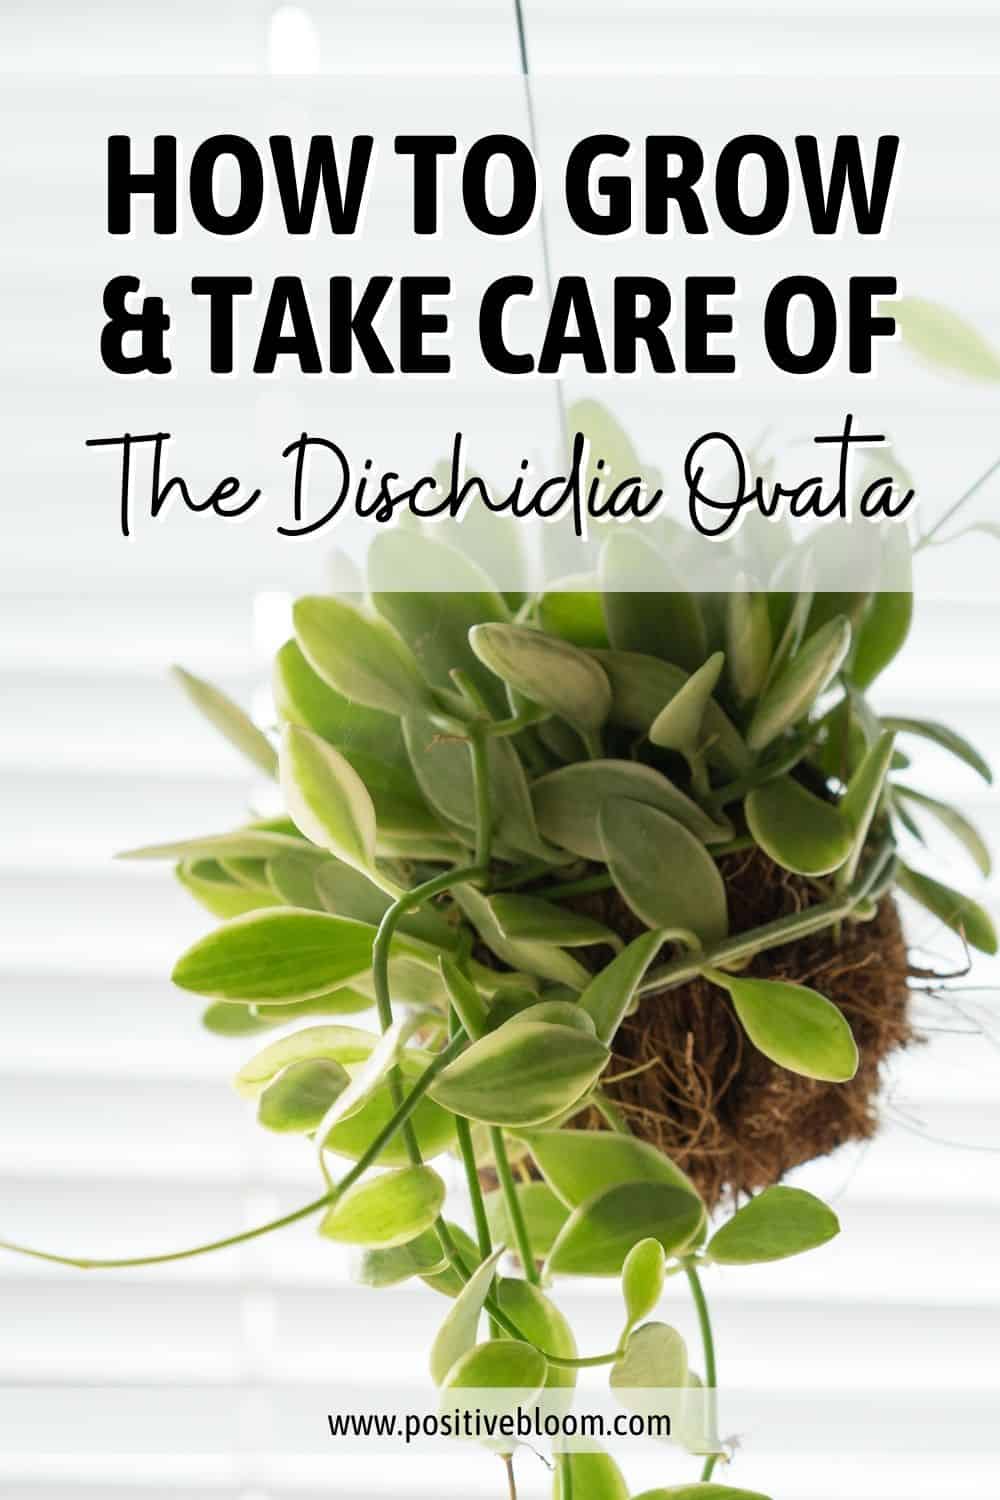 How To Grow & Take Care Of The Dischidia Ovata Pinterest